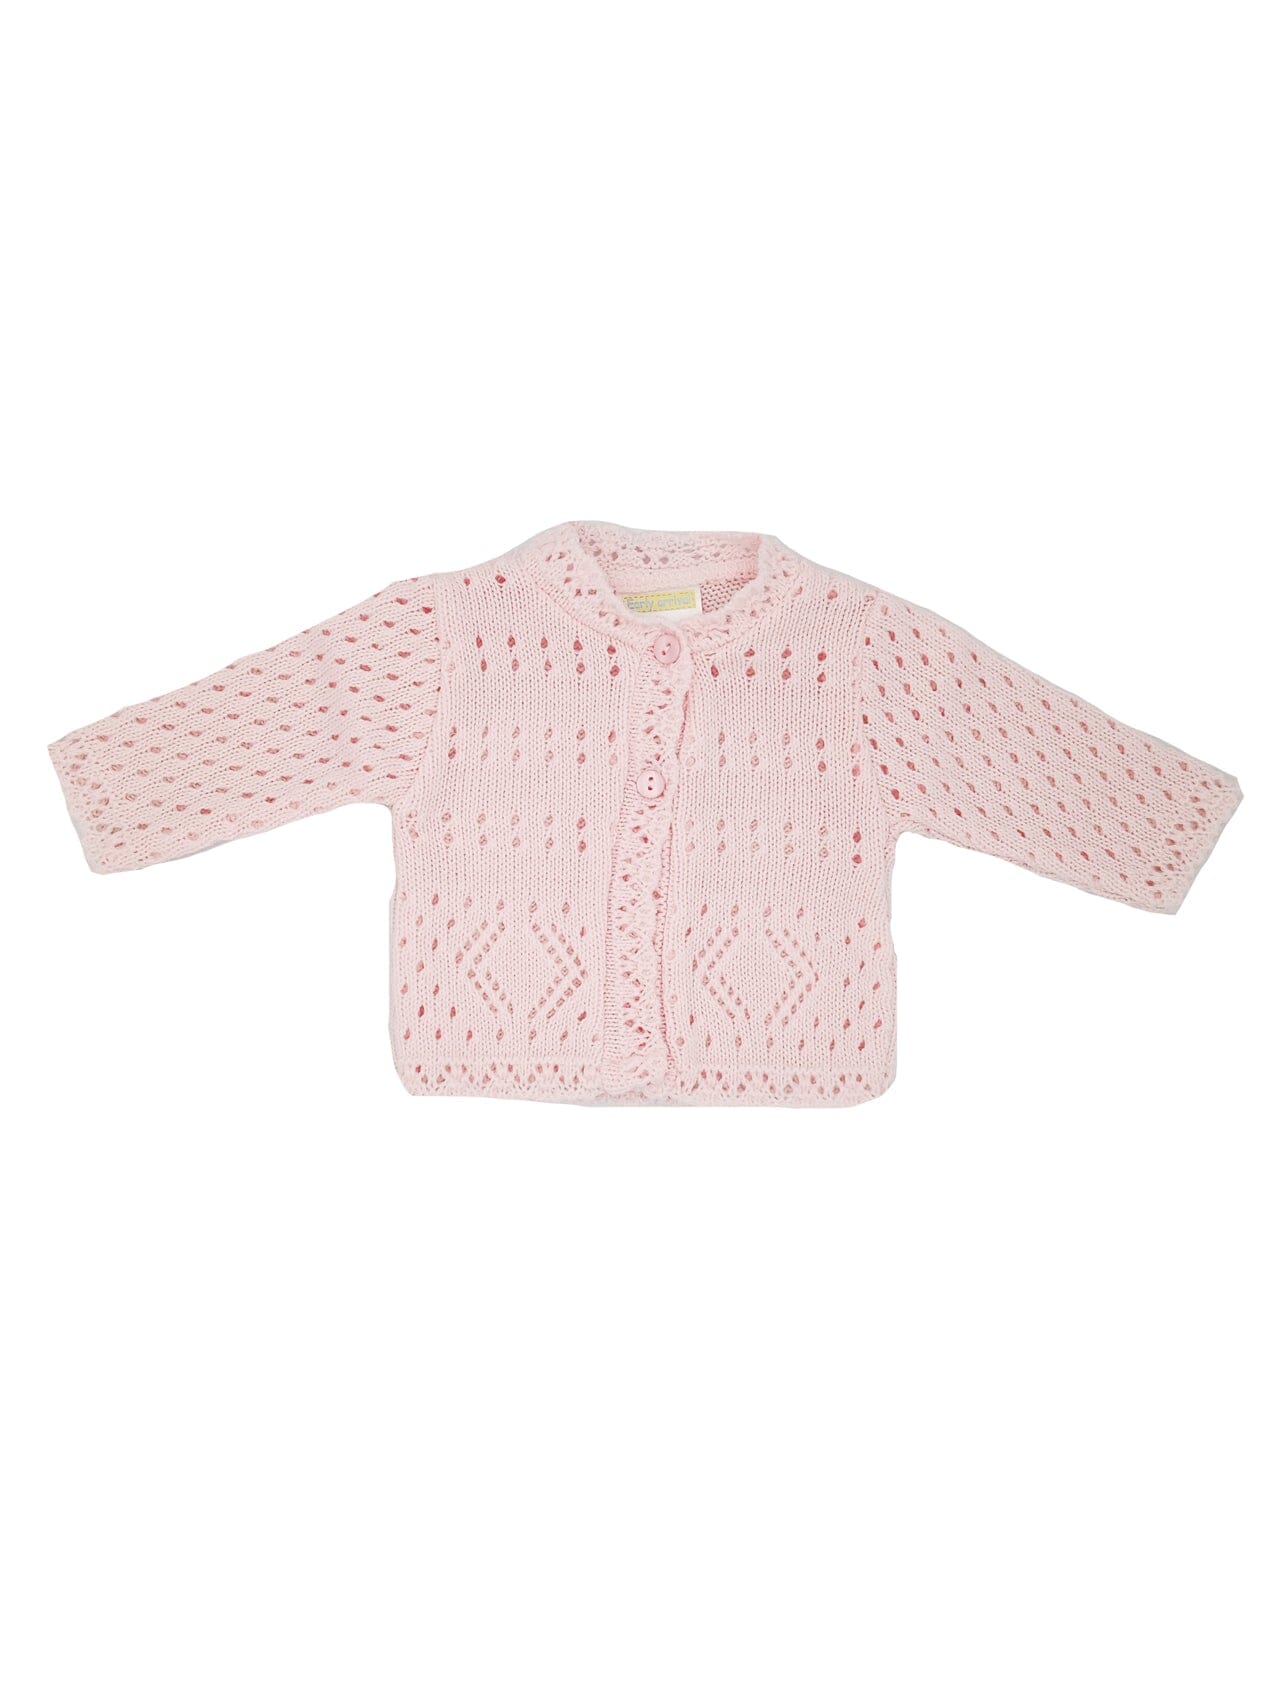 Pink Pointelle Cardigan - Cardigan / Jacket - Early Arrival